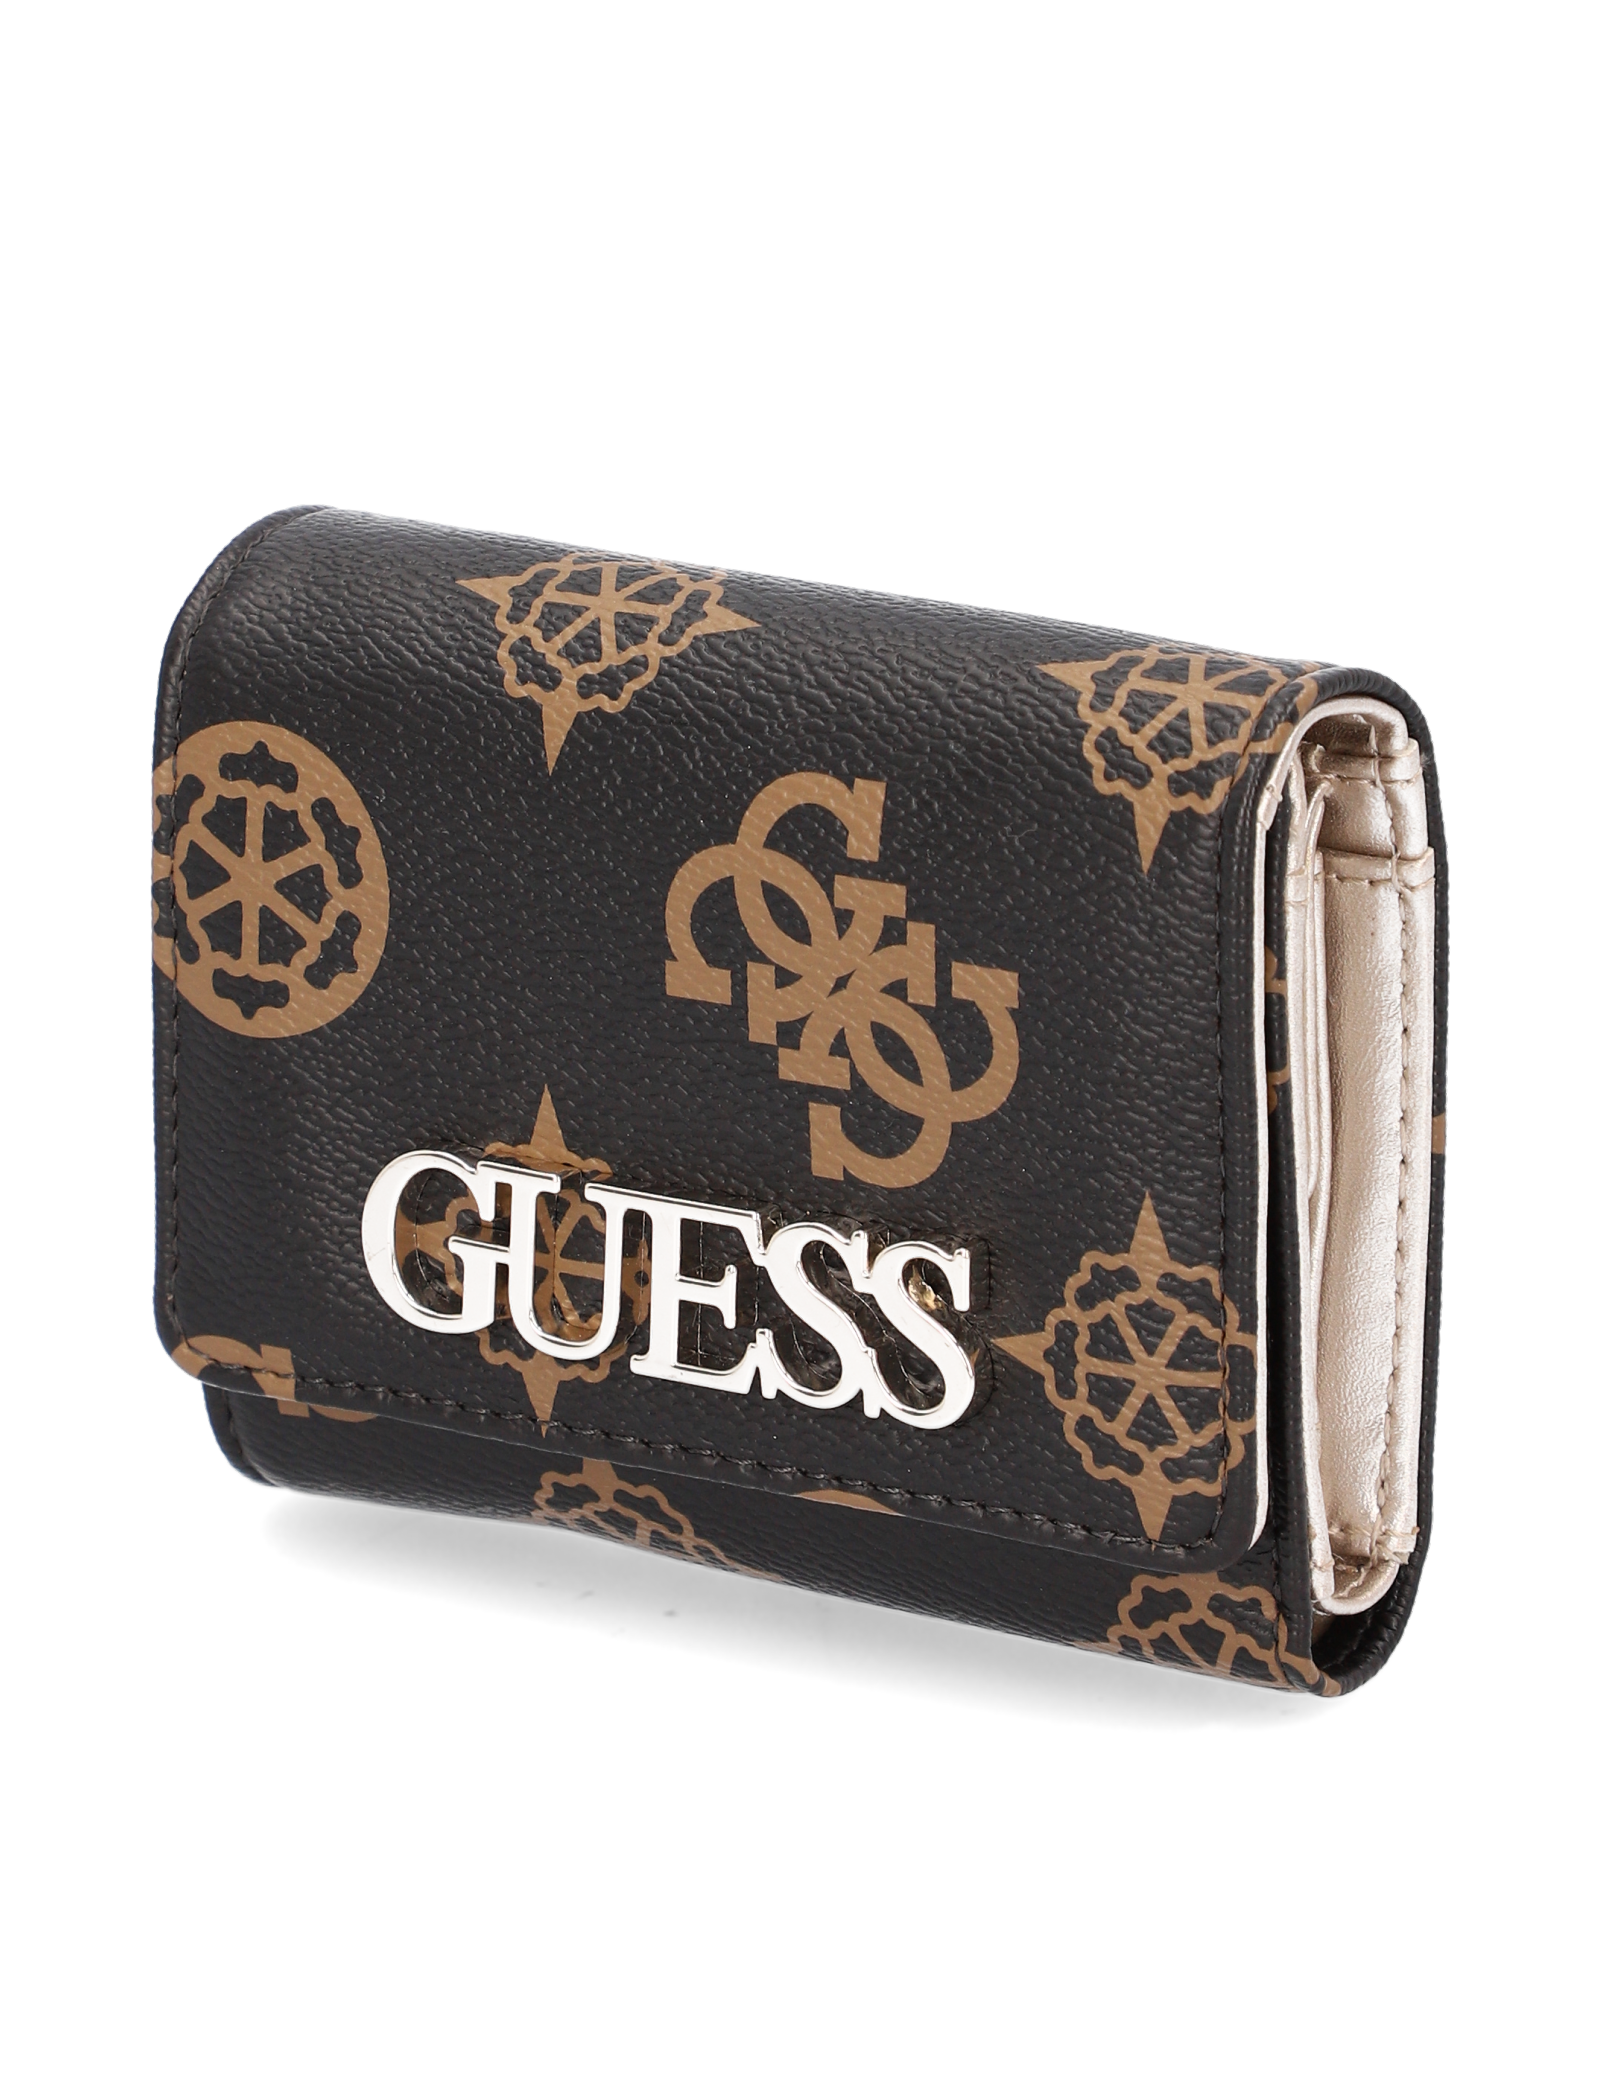 

GUESS UPTOWN CHIC Small Trifold